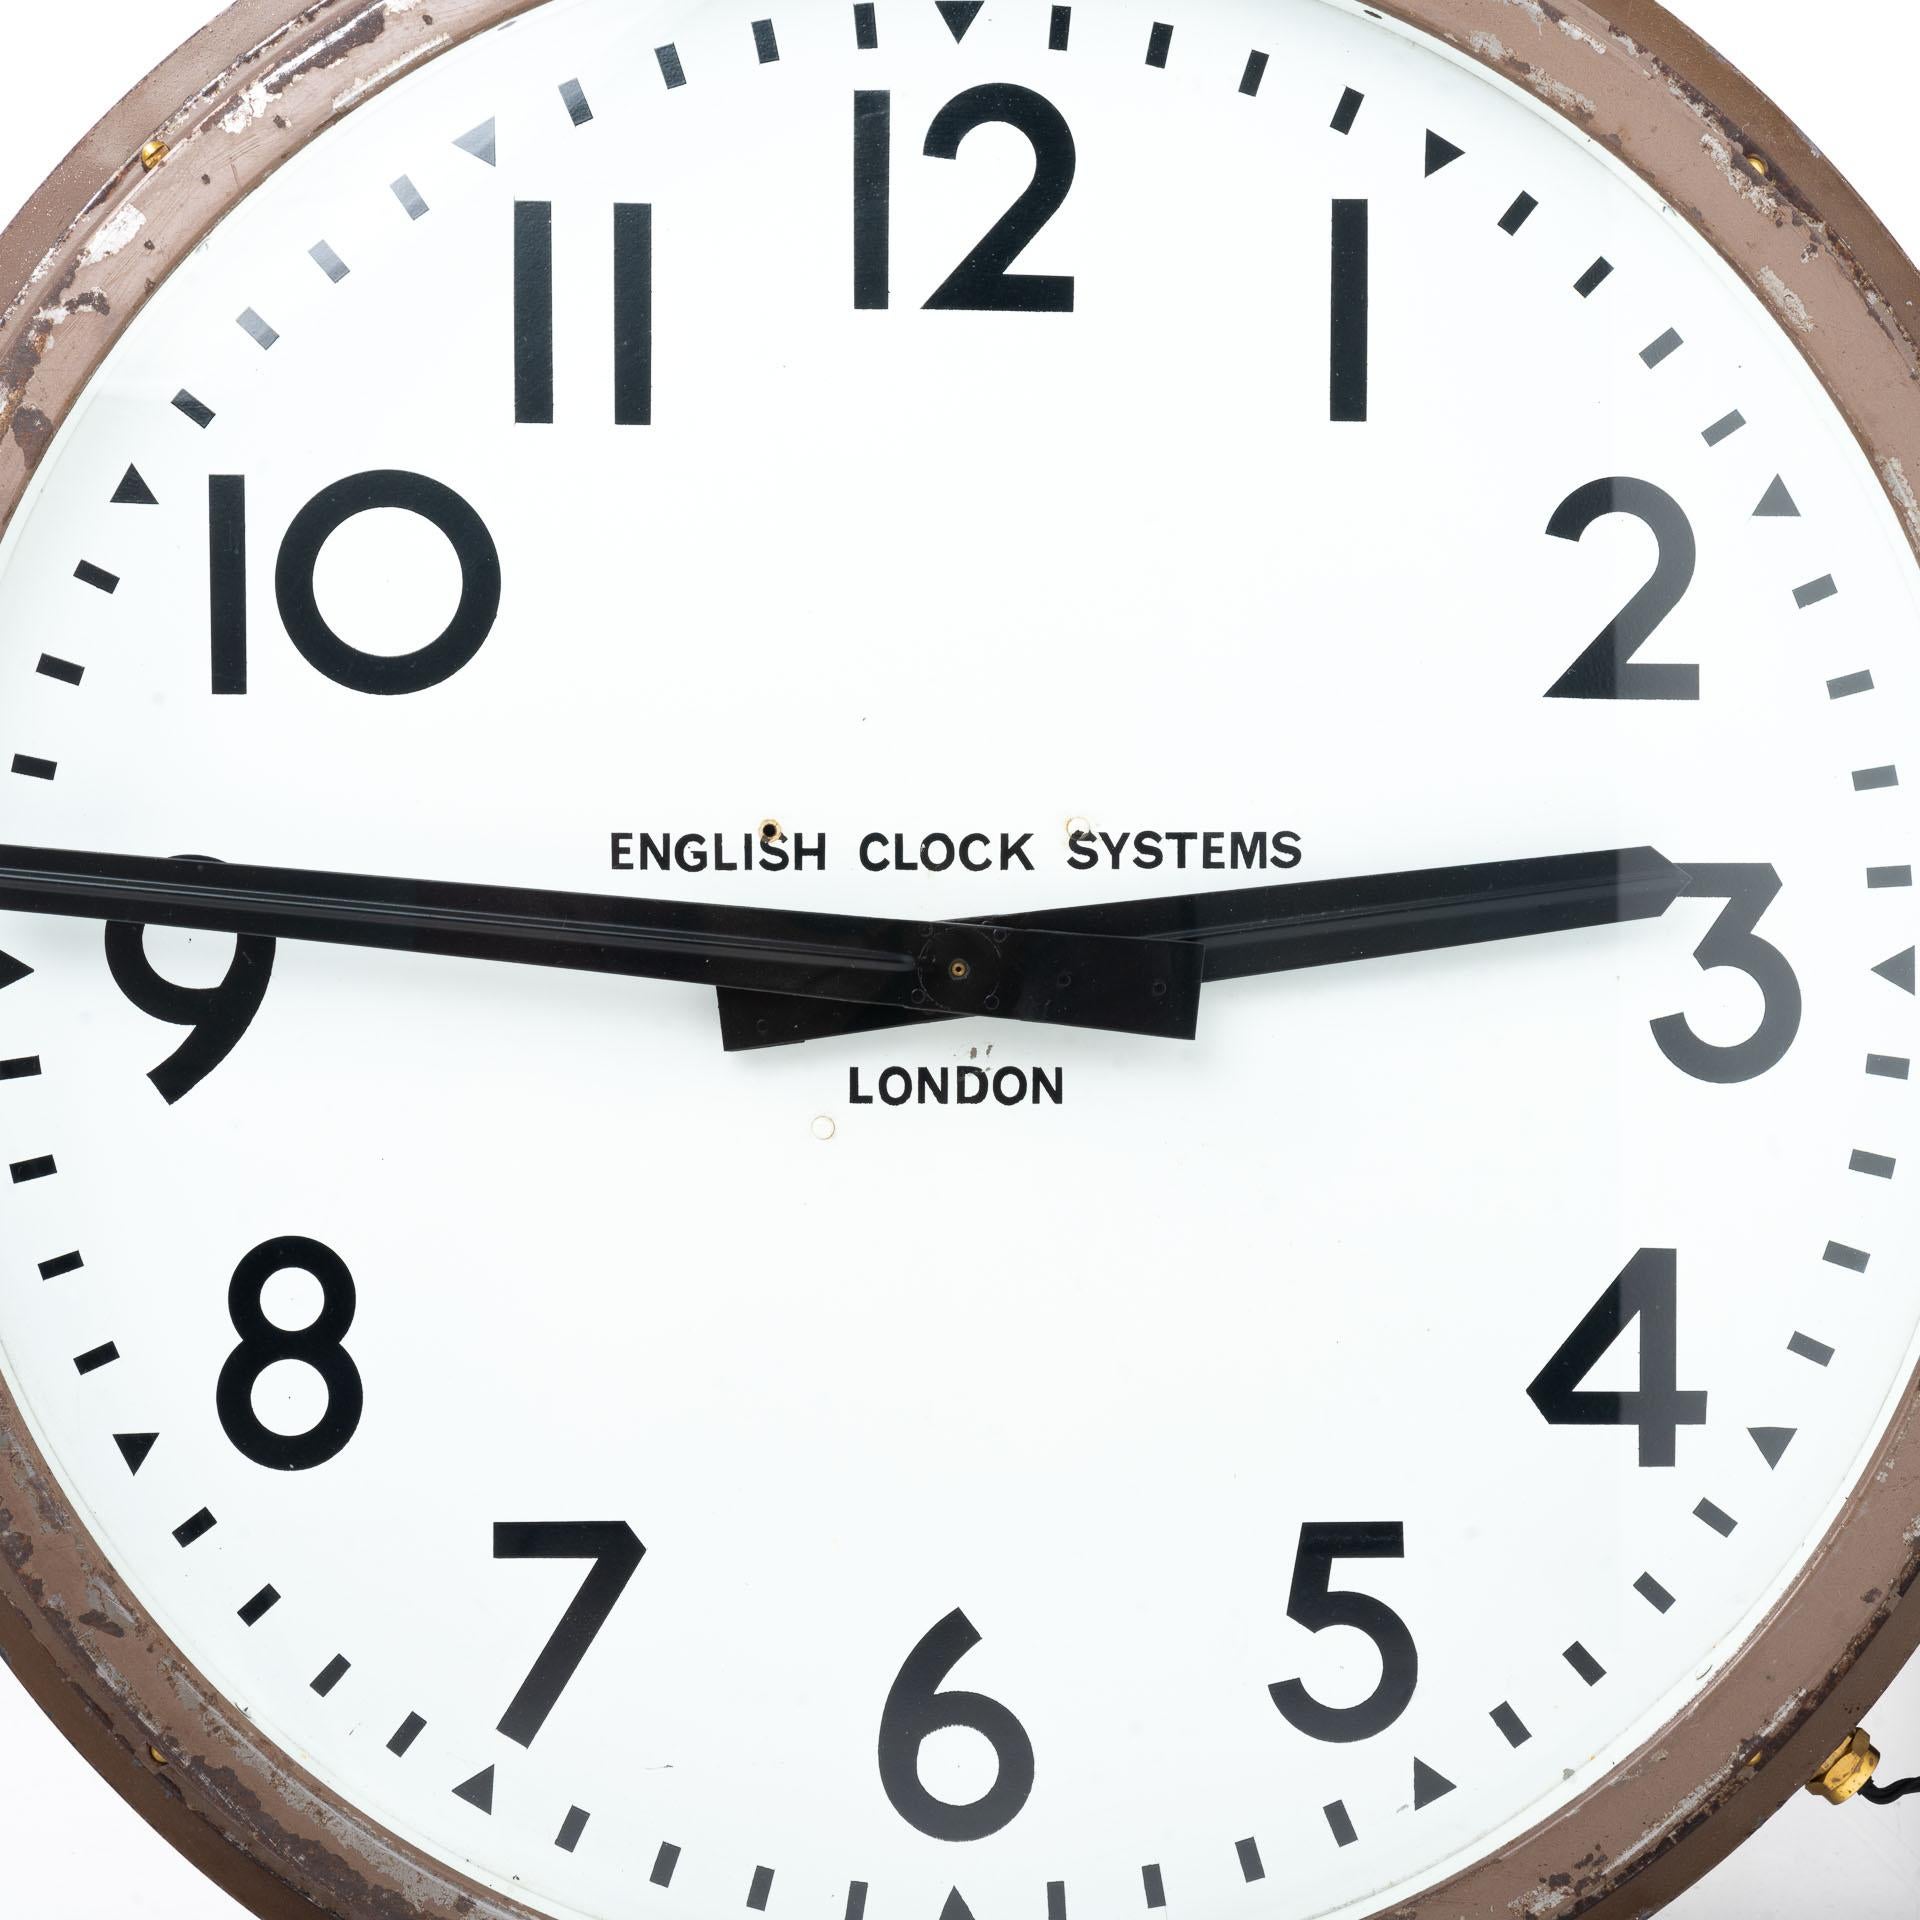 British Huge Double Sided Railway Clock by English Clock Systems